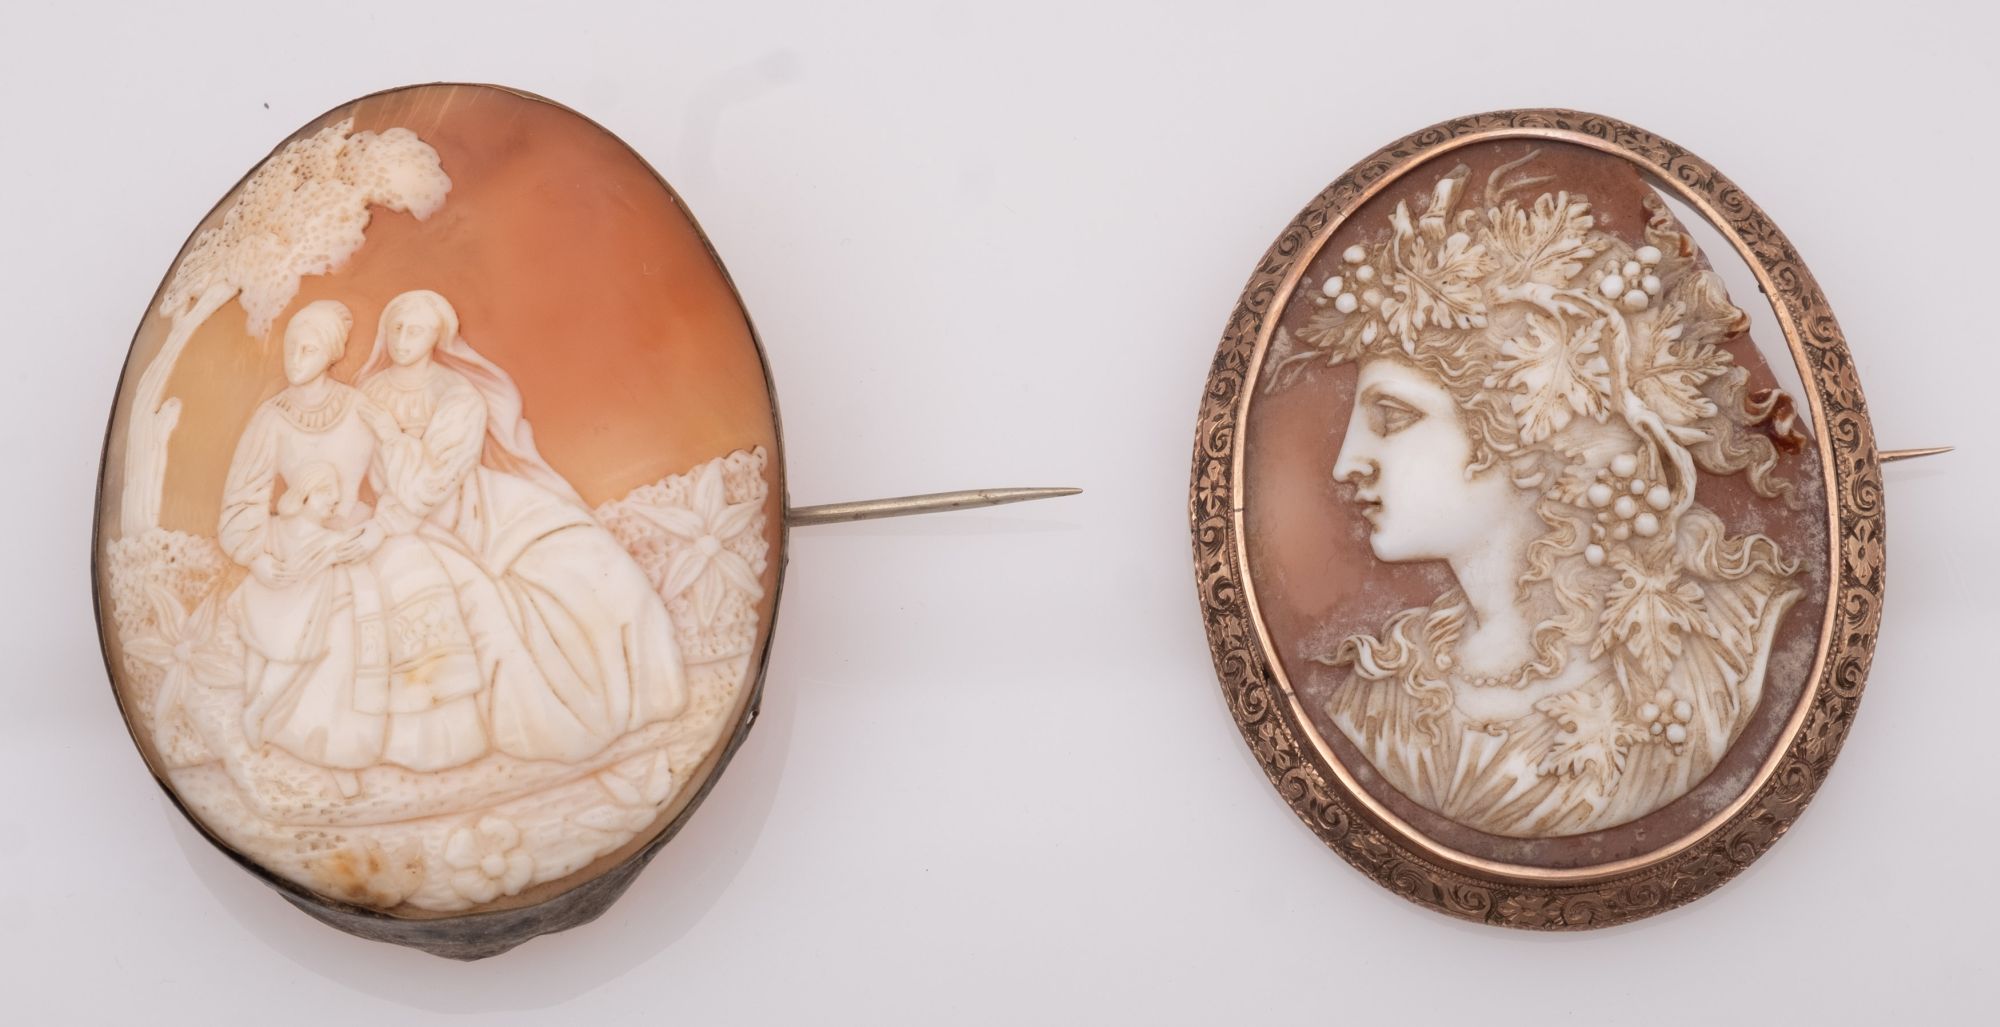 Two 19th century cameo brooches, one in unmarked gold frame with engraved decoration, another